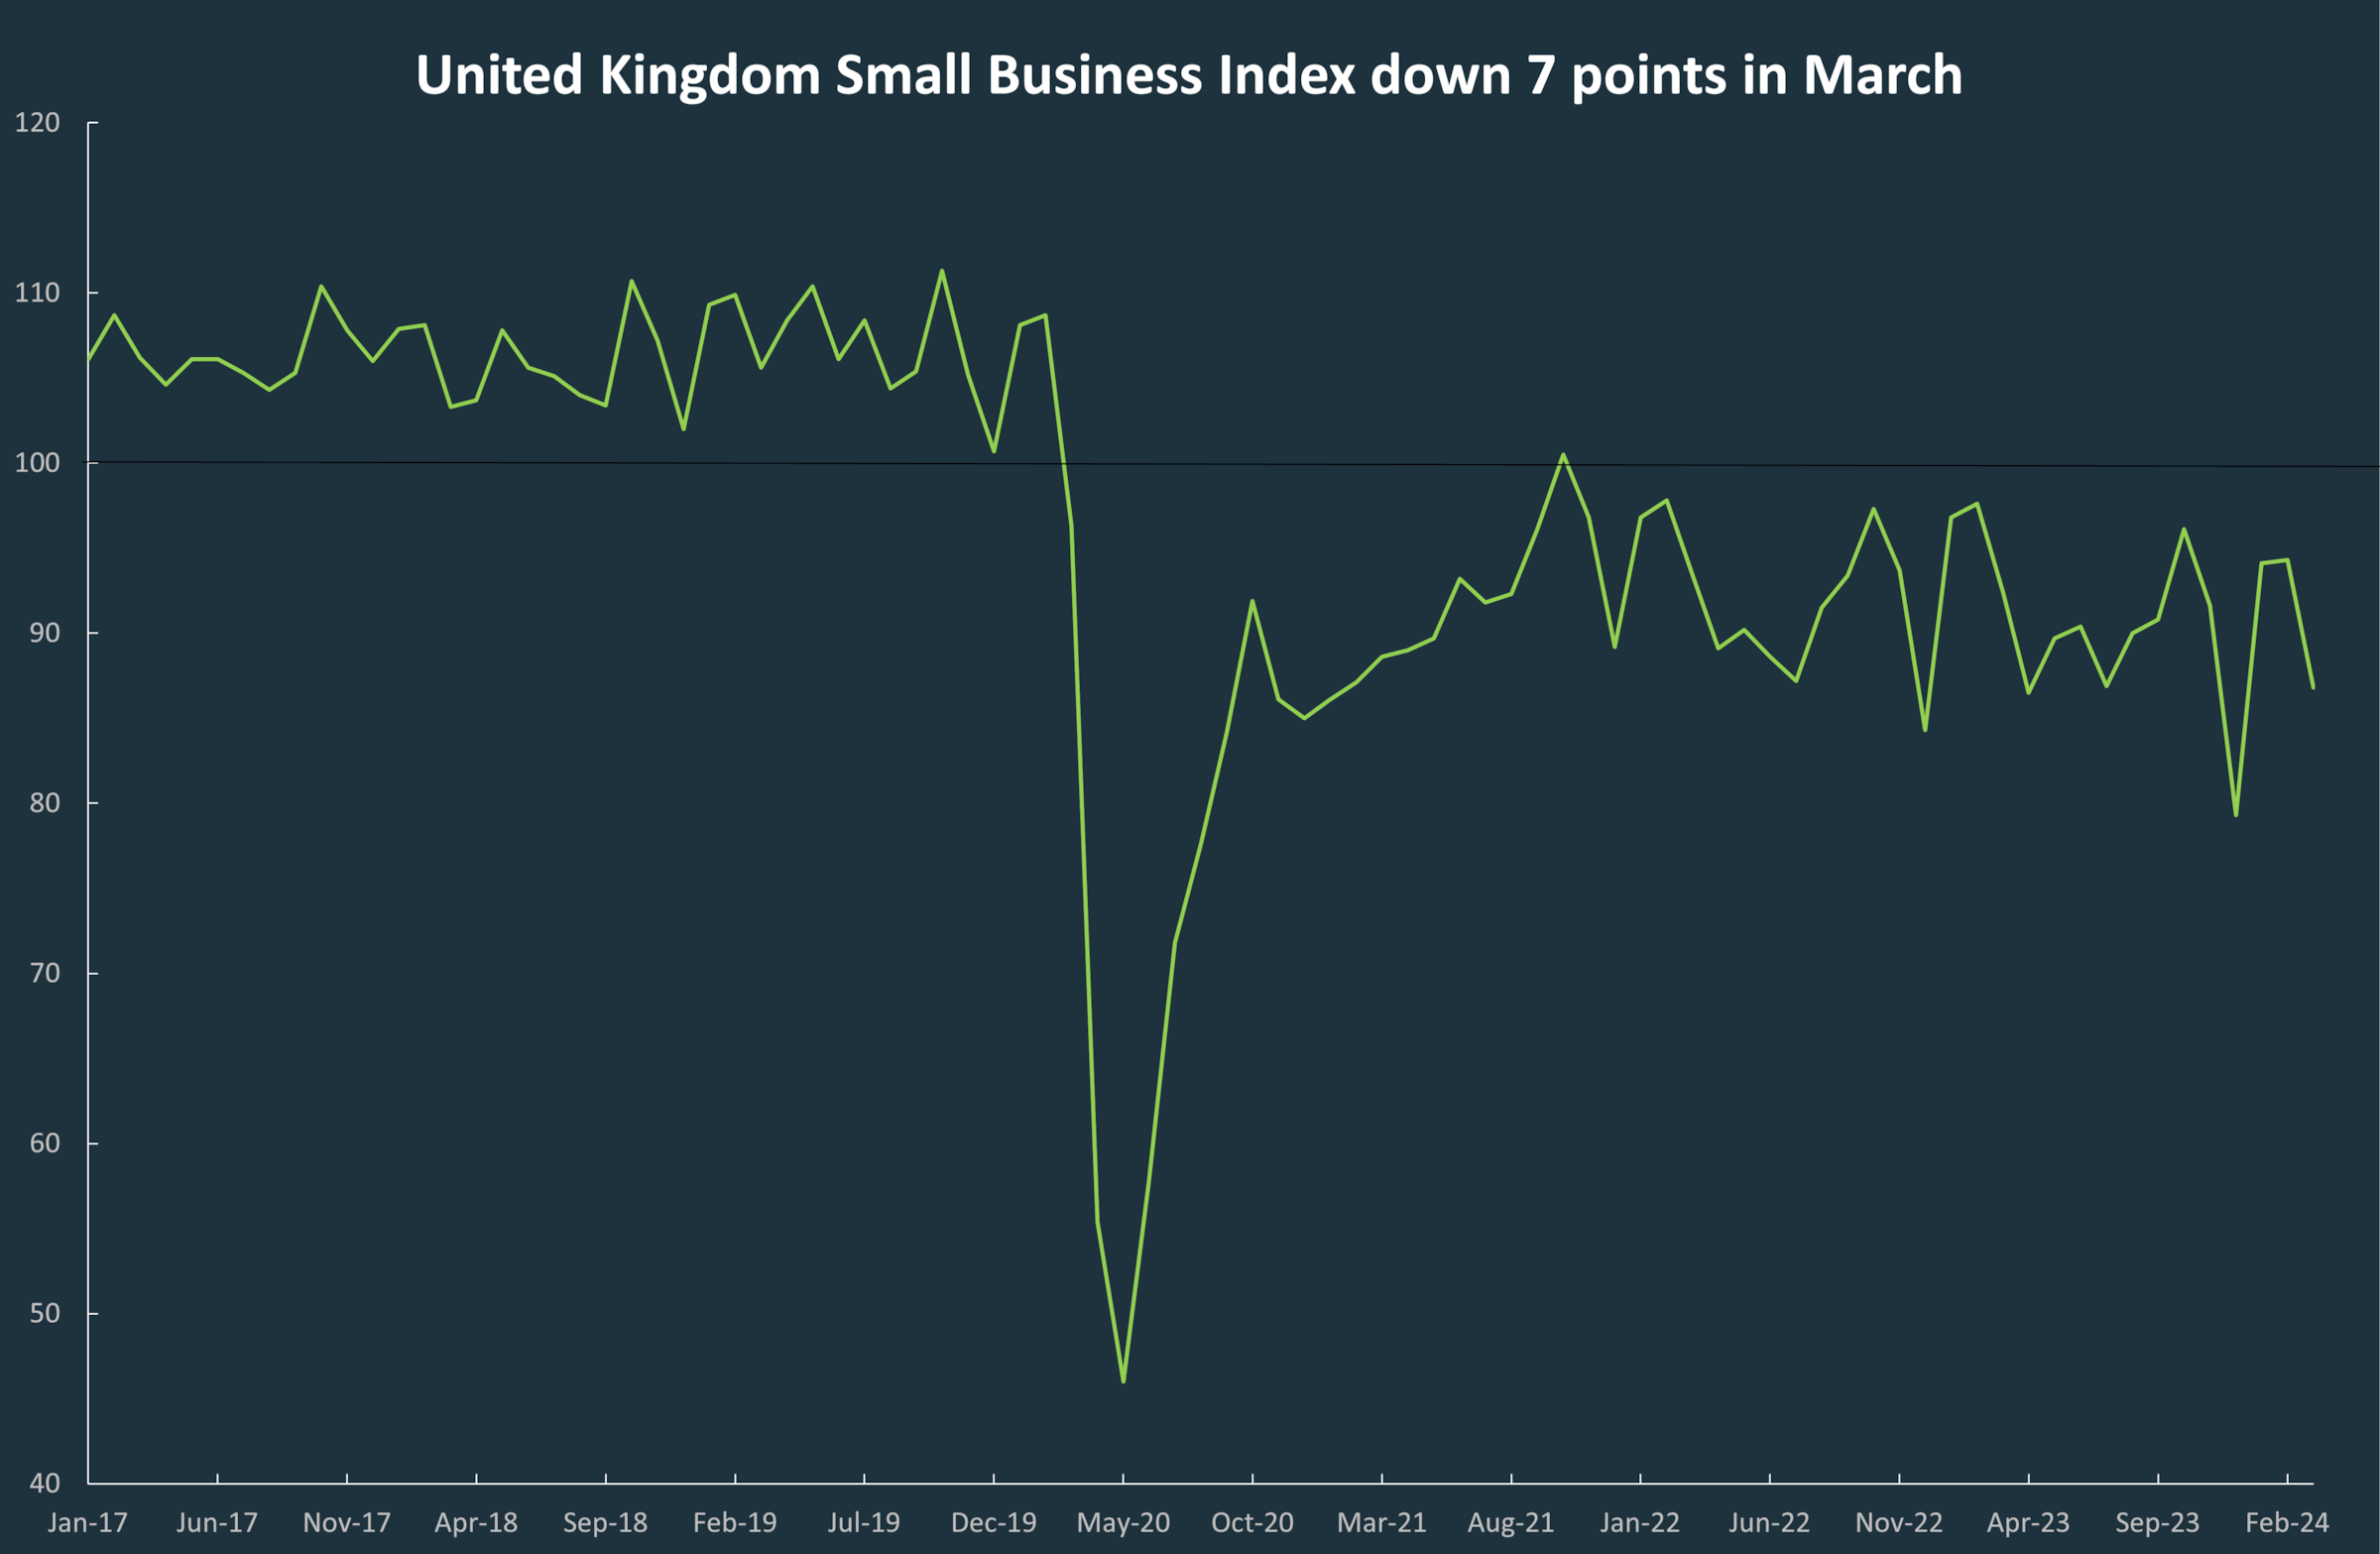 A line graph showing the ups and downs in the United Kingdom Small Business Index since January 2017.